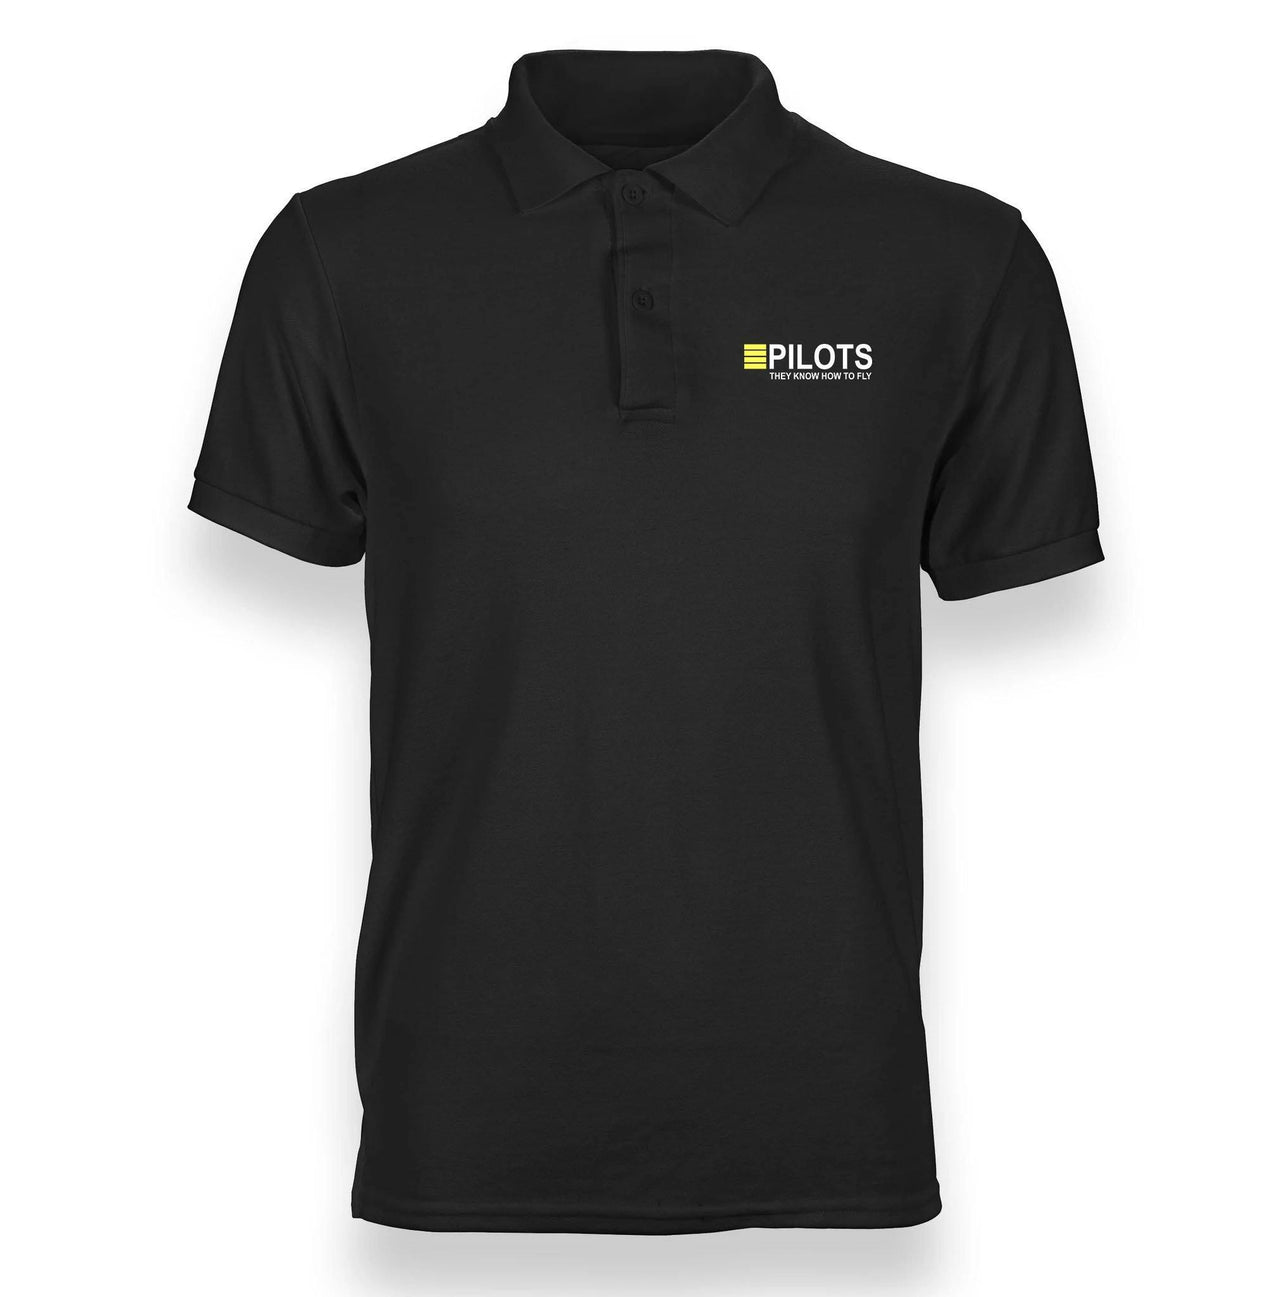 PILOTS THEY KNOW HOW TO FLY POLO SHIRT THE AV8R